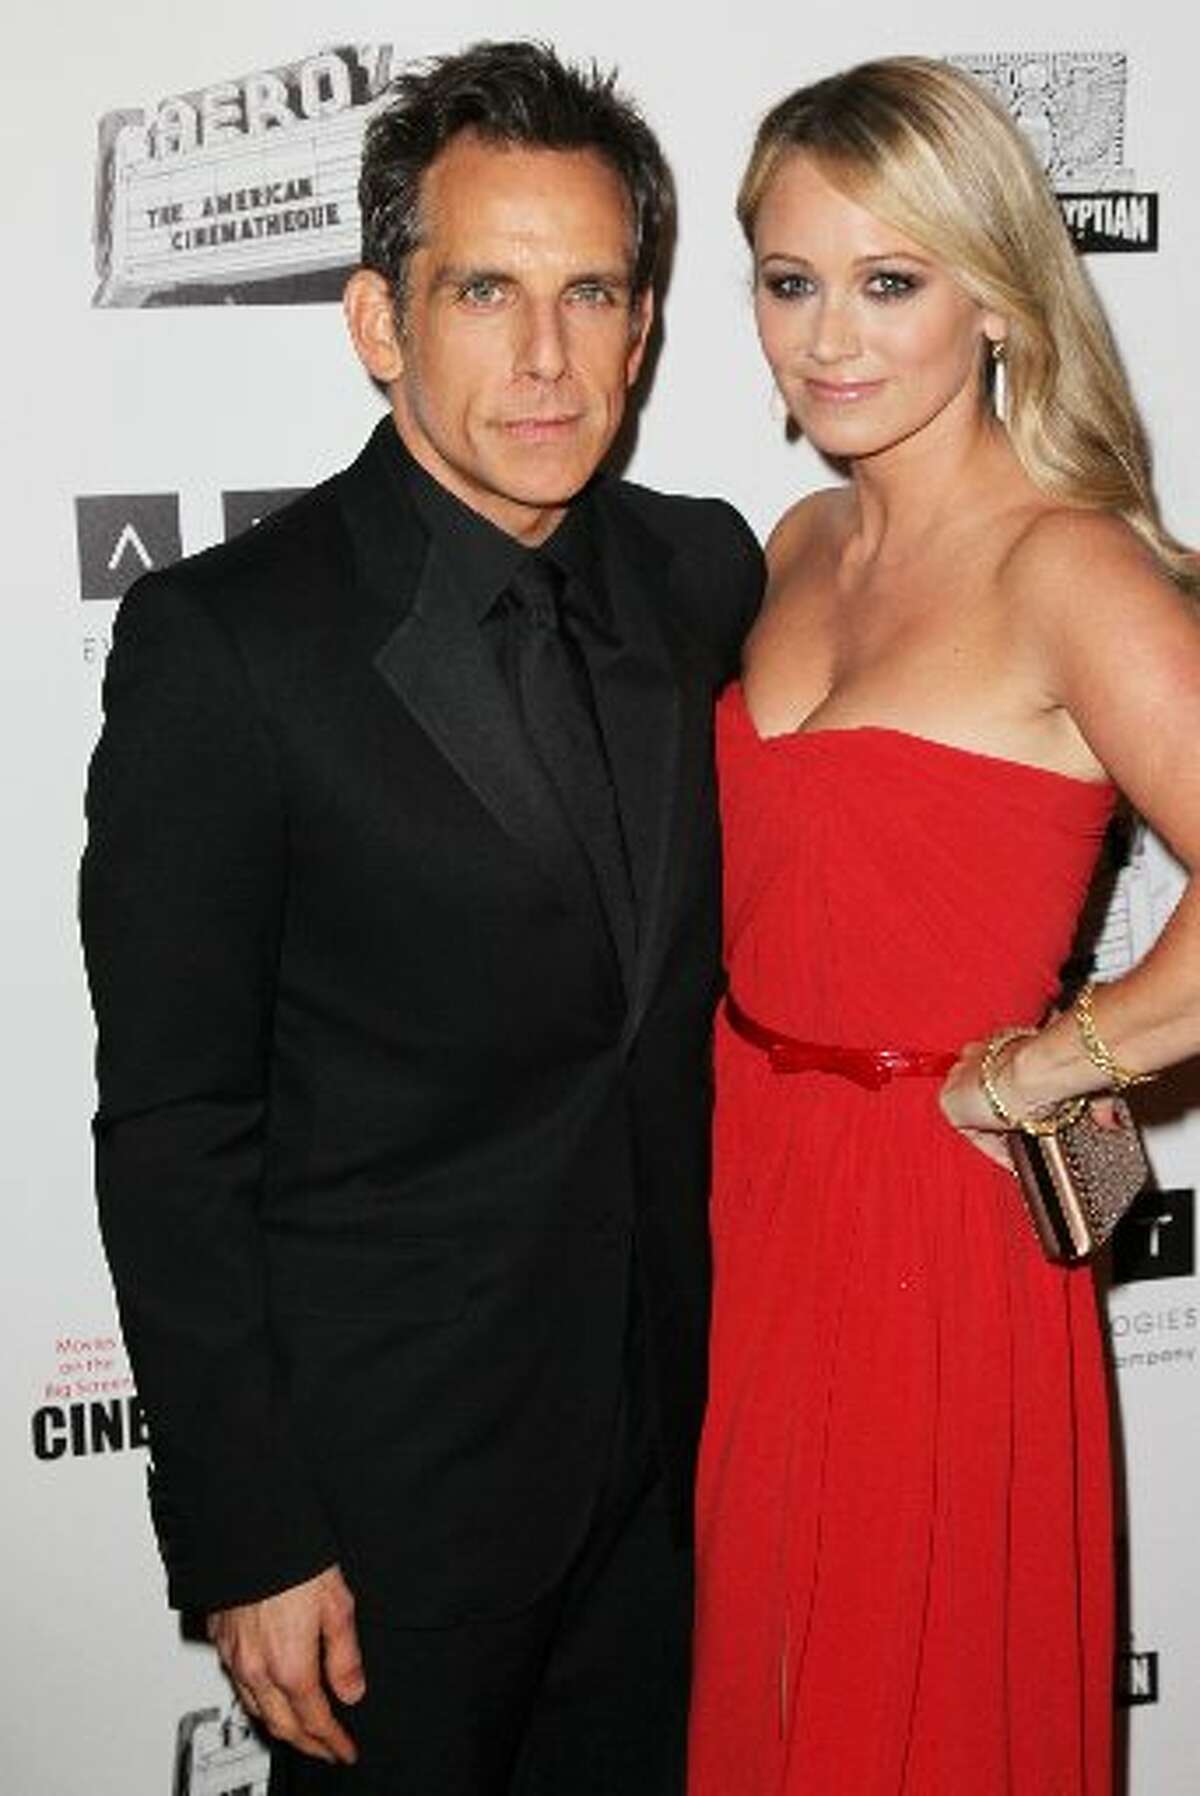 Actors Ben Stiller and Christine Taylor attend the 26th American Cinematheque Award Gala honoring Ben Stiller at The Beverly Hilton Hotel on November 15, 2012 in Beverly Hills, California. (Photo by David Livingston/Getty Images) (Getty)